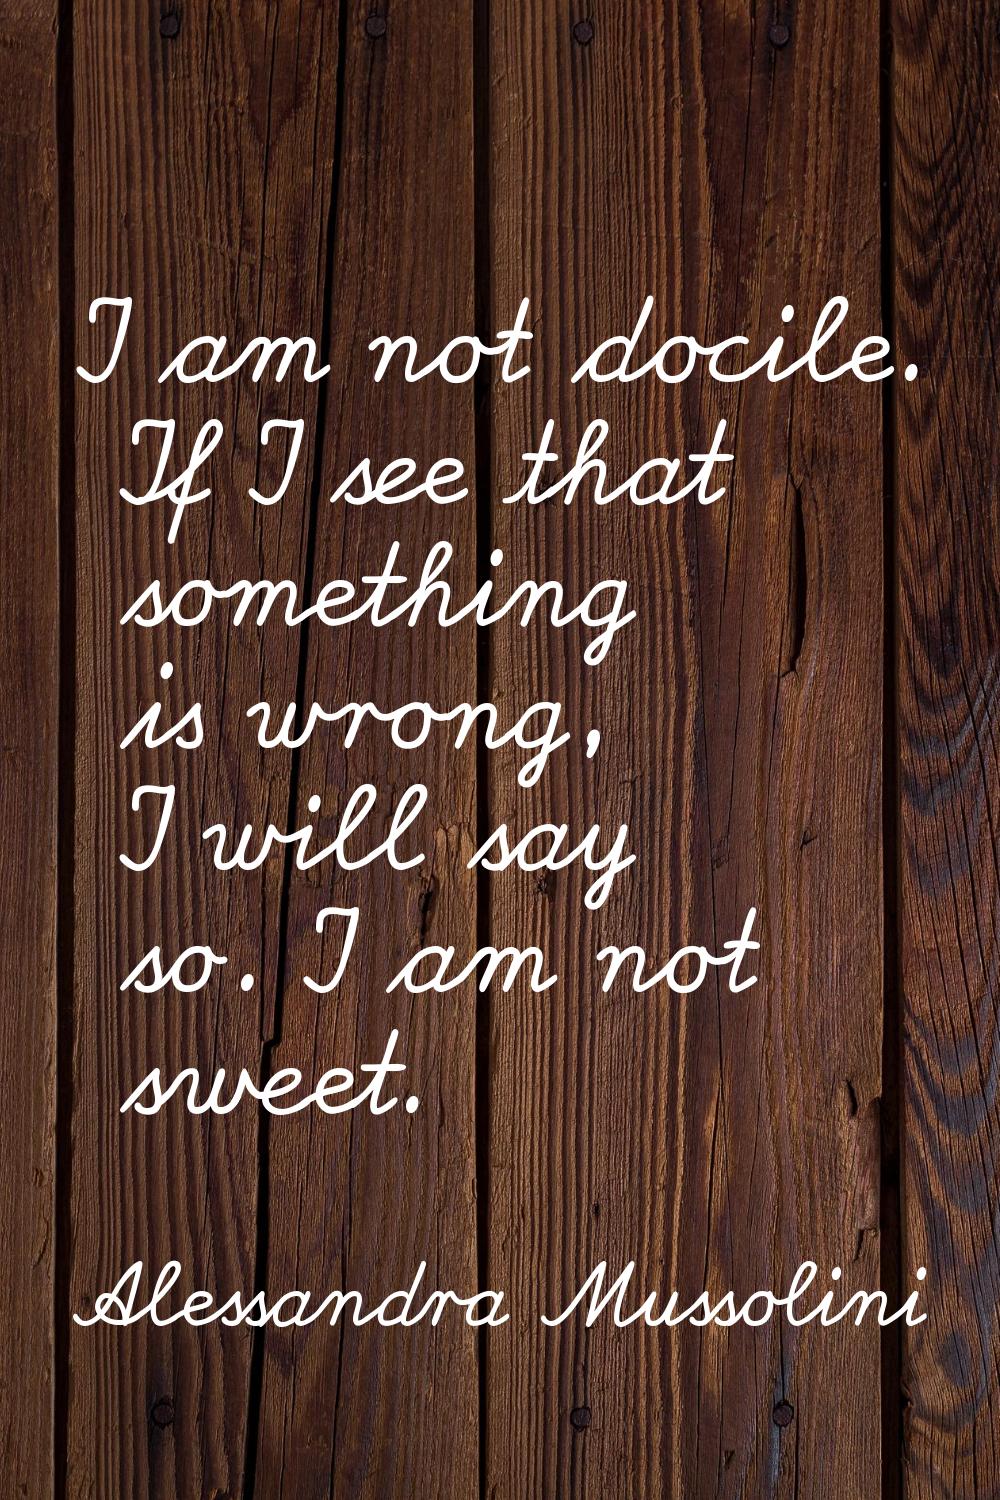 I am not docile. If I see that something is wrong, I will say so. I am not sweet.